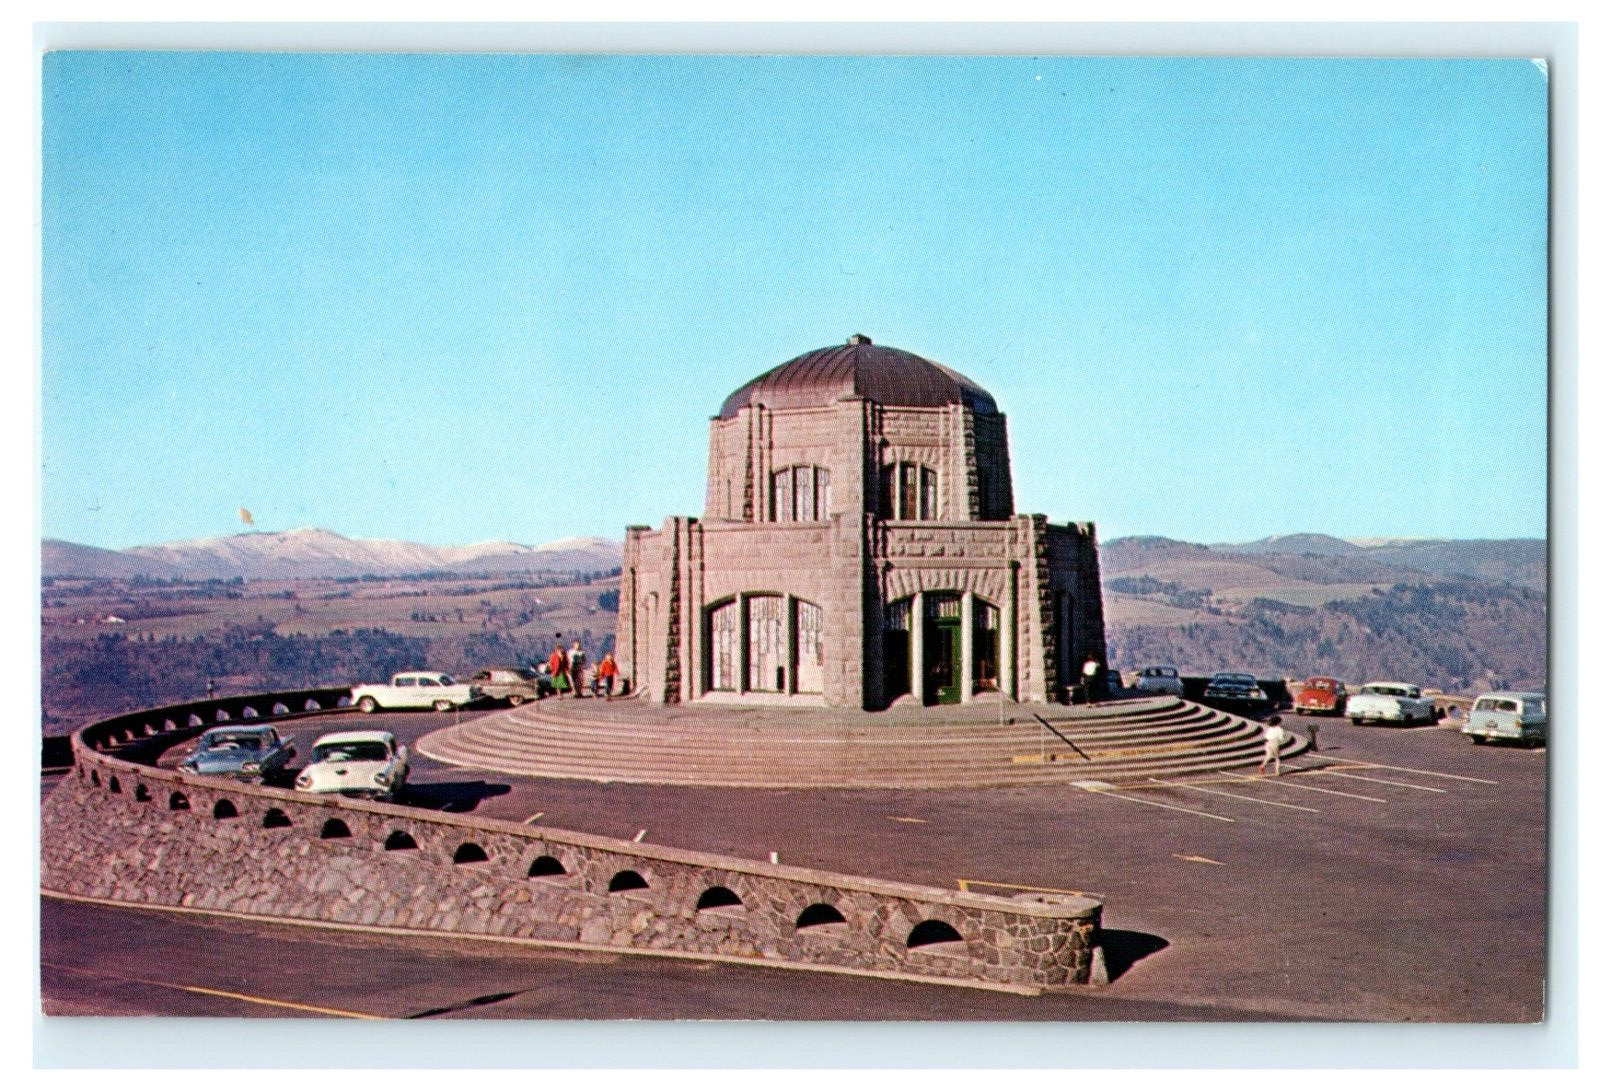 Vista House Crown Point Oregon - Columbia River Gorge - Staining